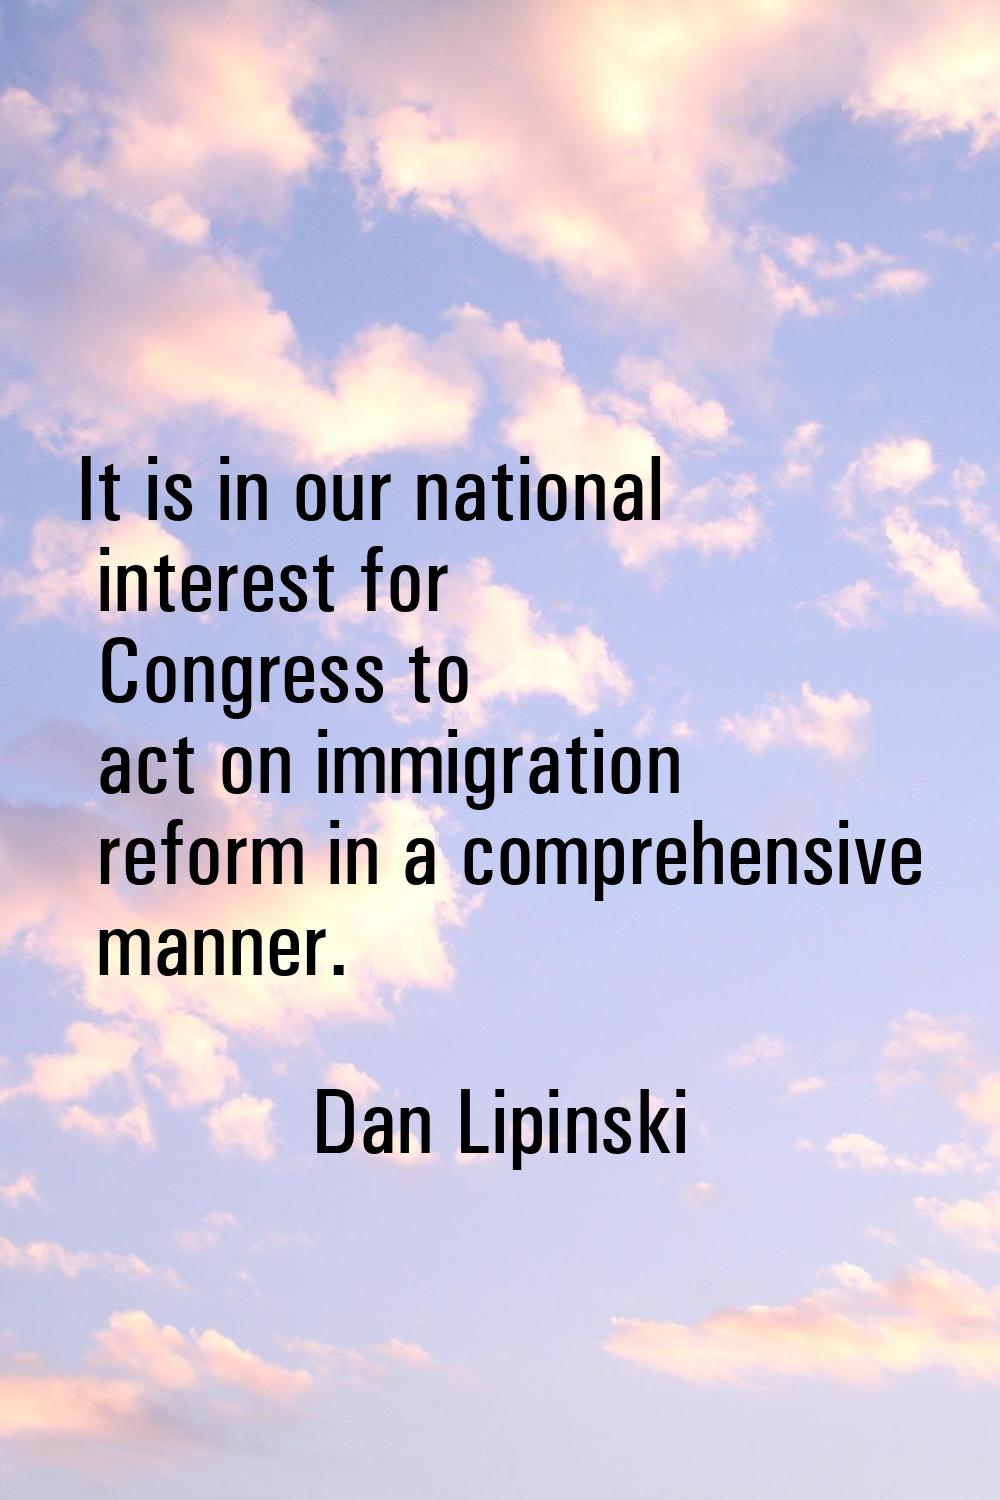 It is in our national interest for Congress to act on immigration reform in a comprehensive manner.